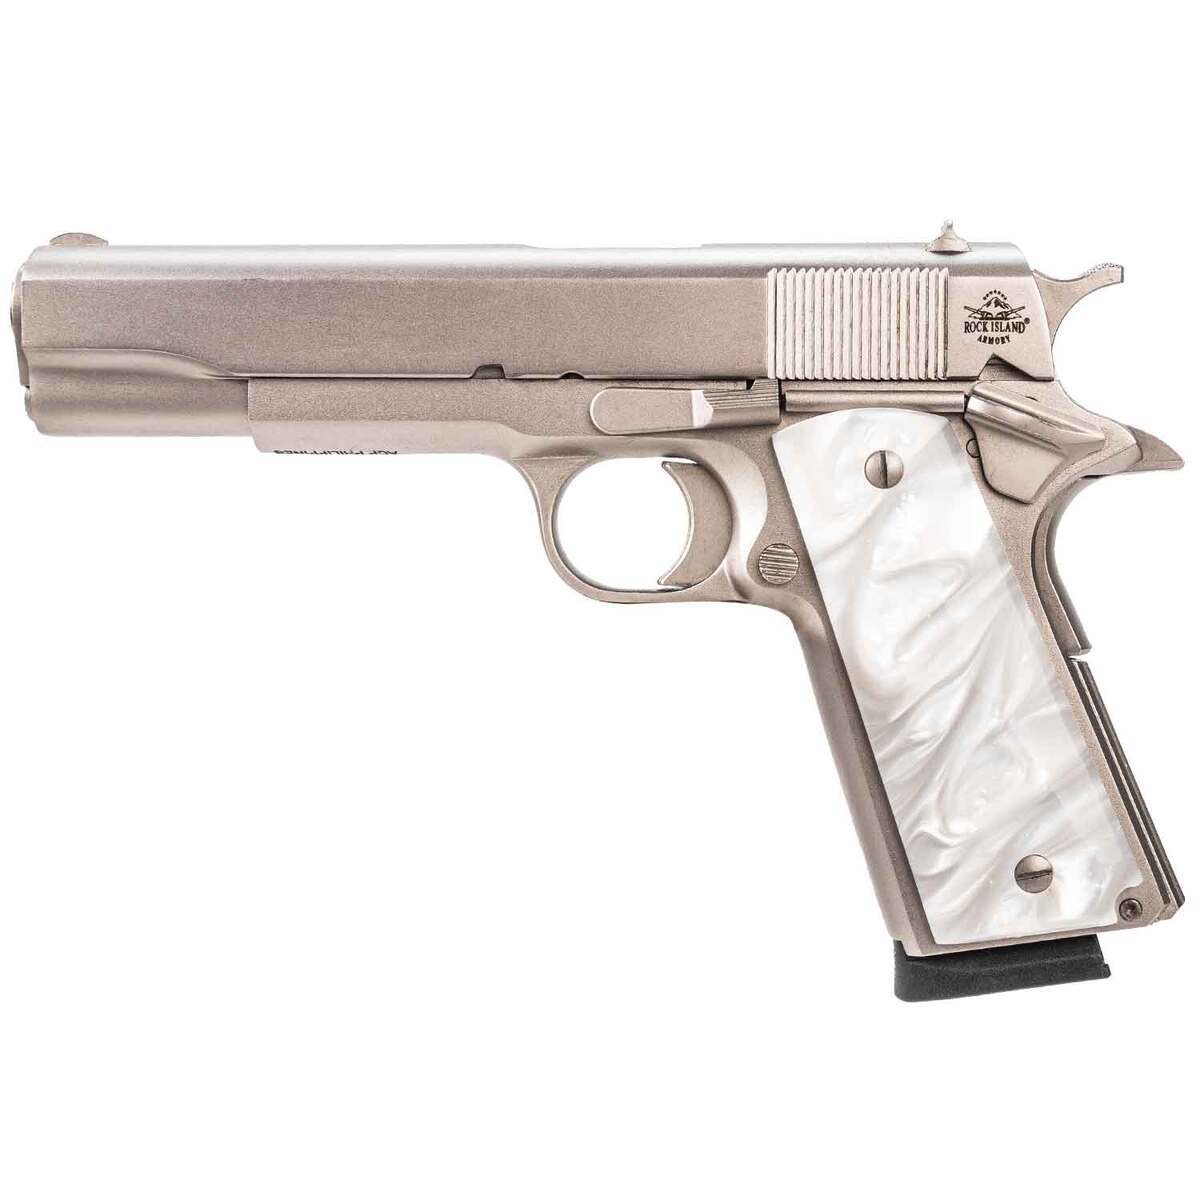 Rock Island Armory M1911 A1 Gi 45 Auto Acp 5in Matte Nickle Pistol 81 Rounds Sportsmans 5962